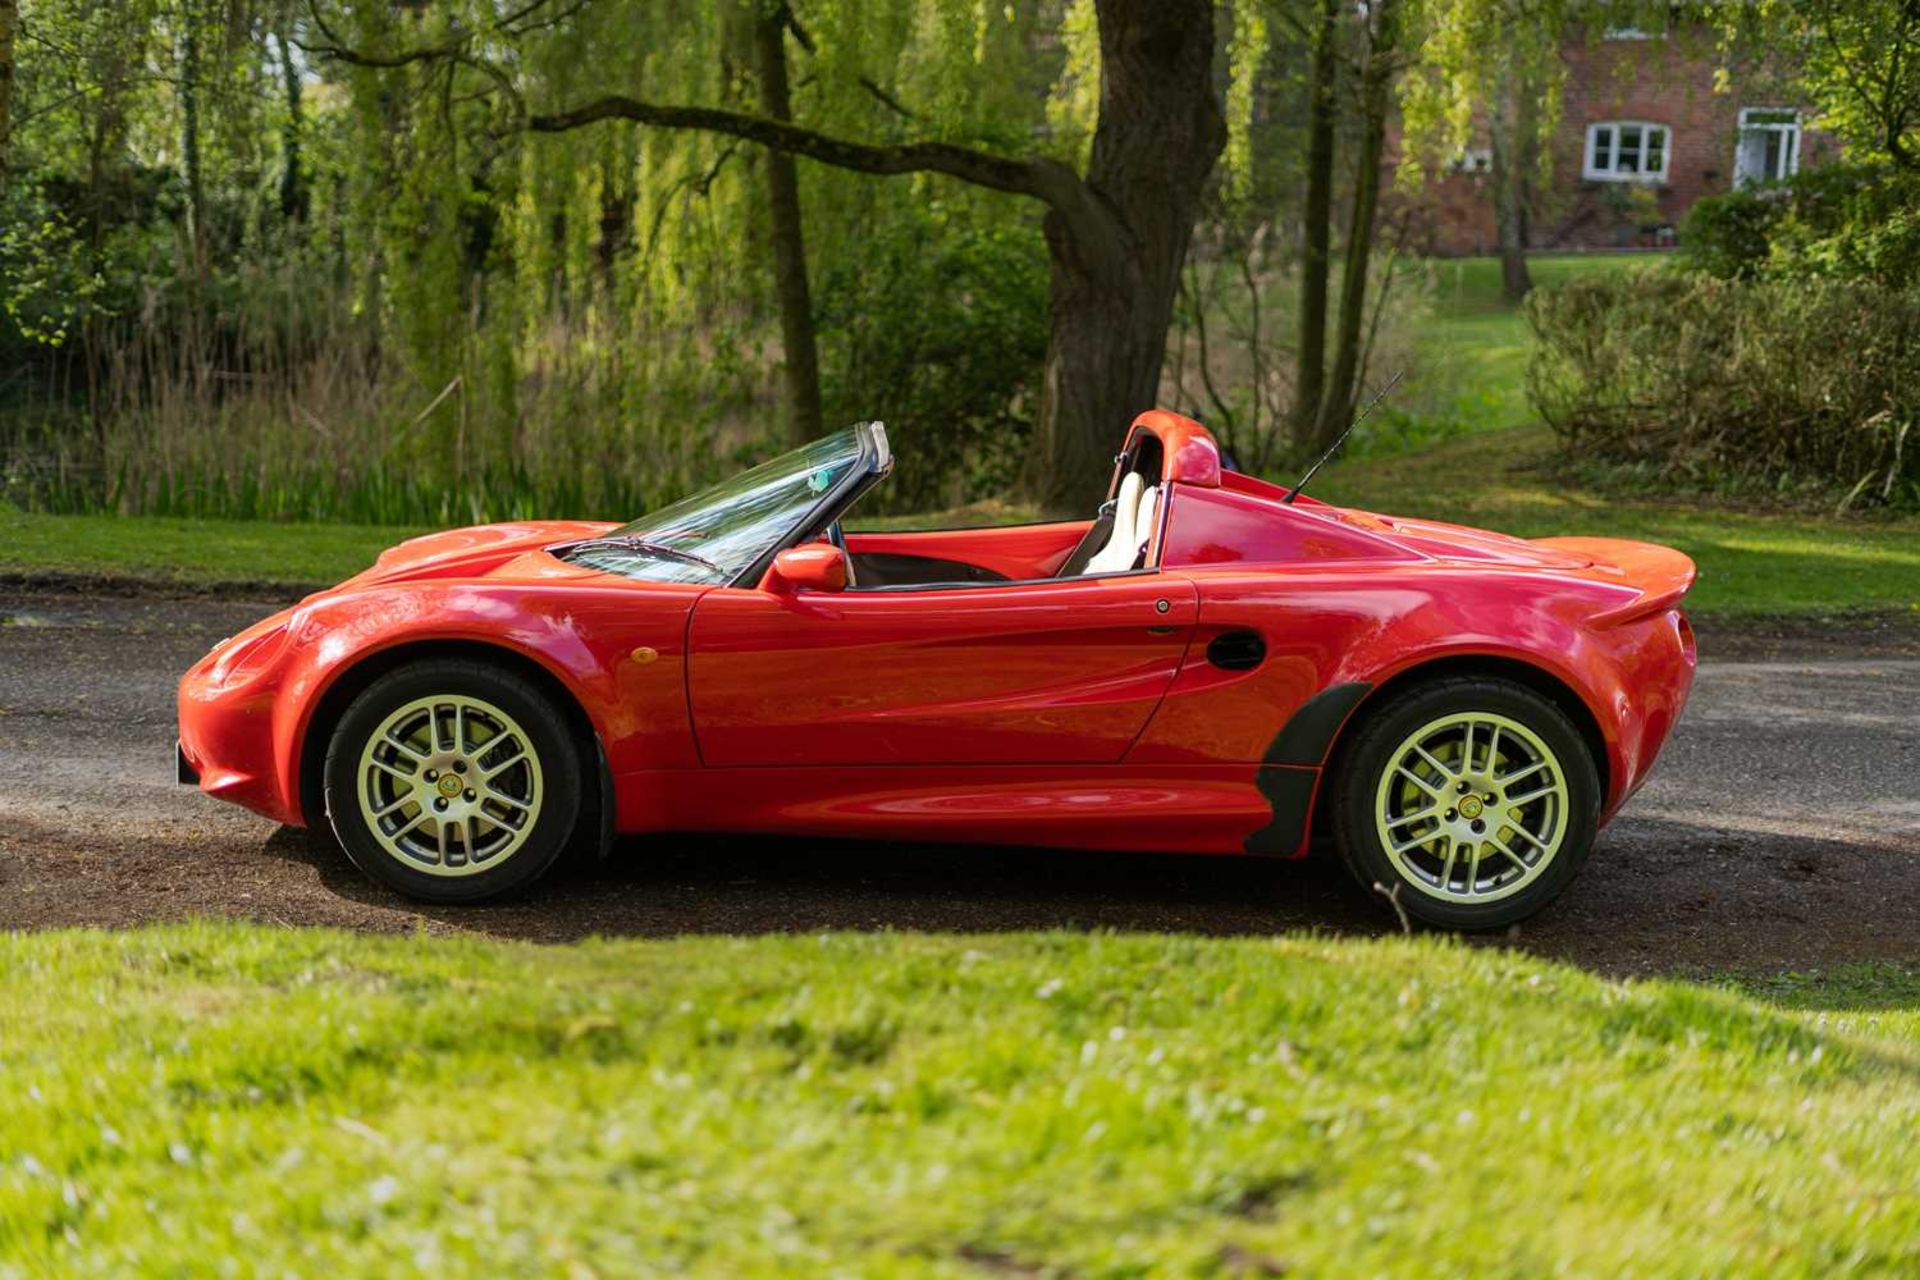 1999 Lotus Elise S1 Only 39,000 miles from new - Image 4 of 57